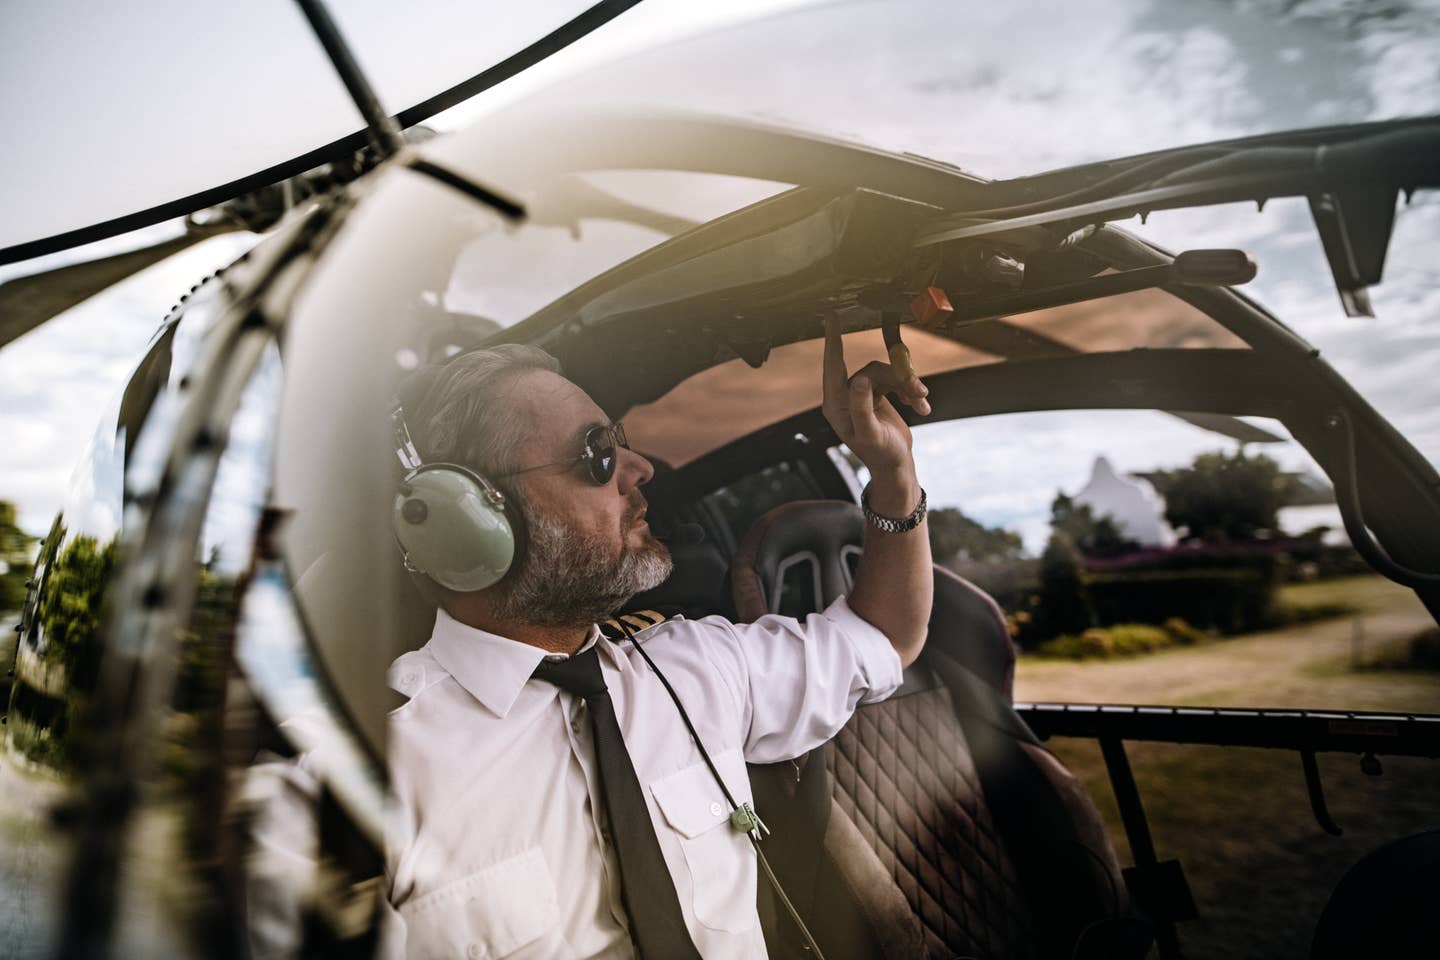 How to Land a Helicopter Pilot Job